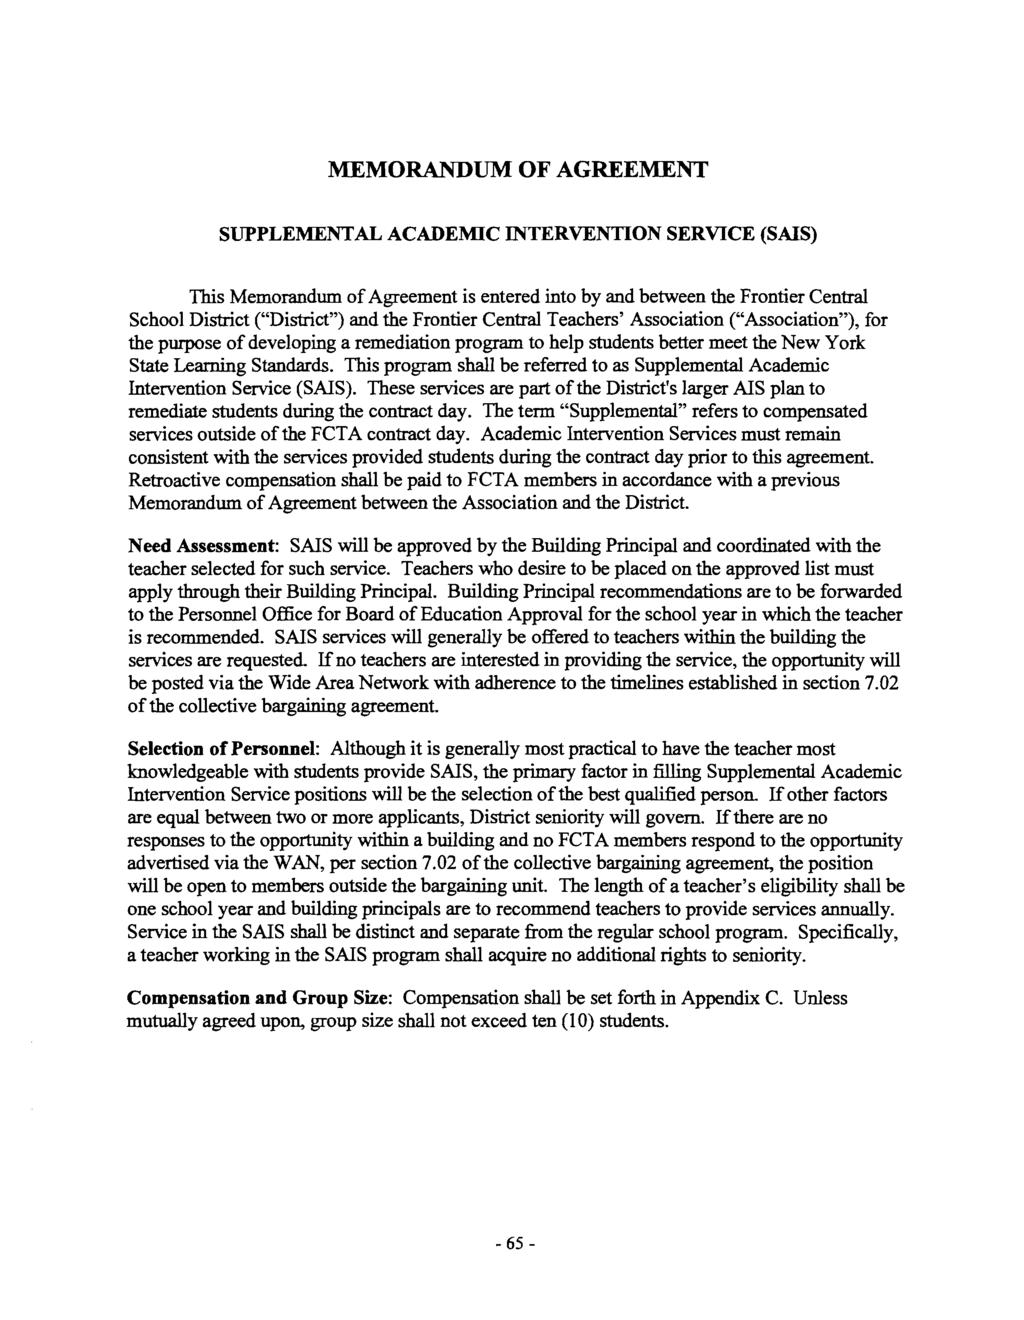 MEMORANDUM OF AGREEMENT SUPPLEMENTAL ACADEMIC INTERVENTION SERVICE (SAIS) This Memorandum of Agreement is entered into by and between the Frontier Central School District ("District") and the